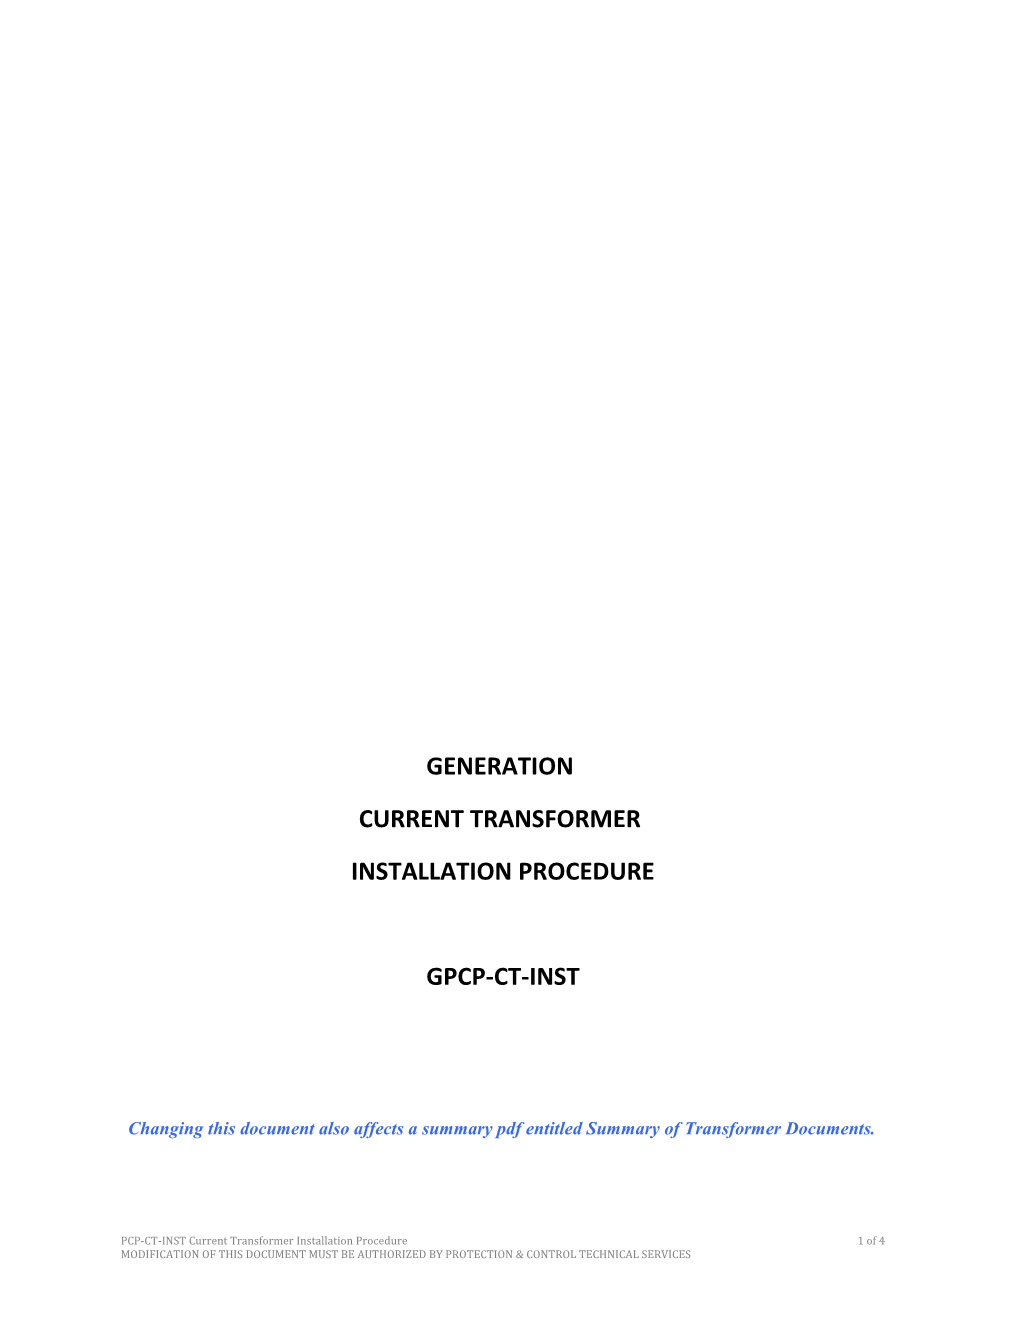 Changing This Document Also Affects a Summary Pdf Entitled Summary of Transformer Documents